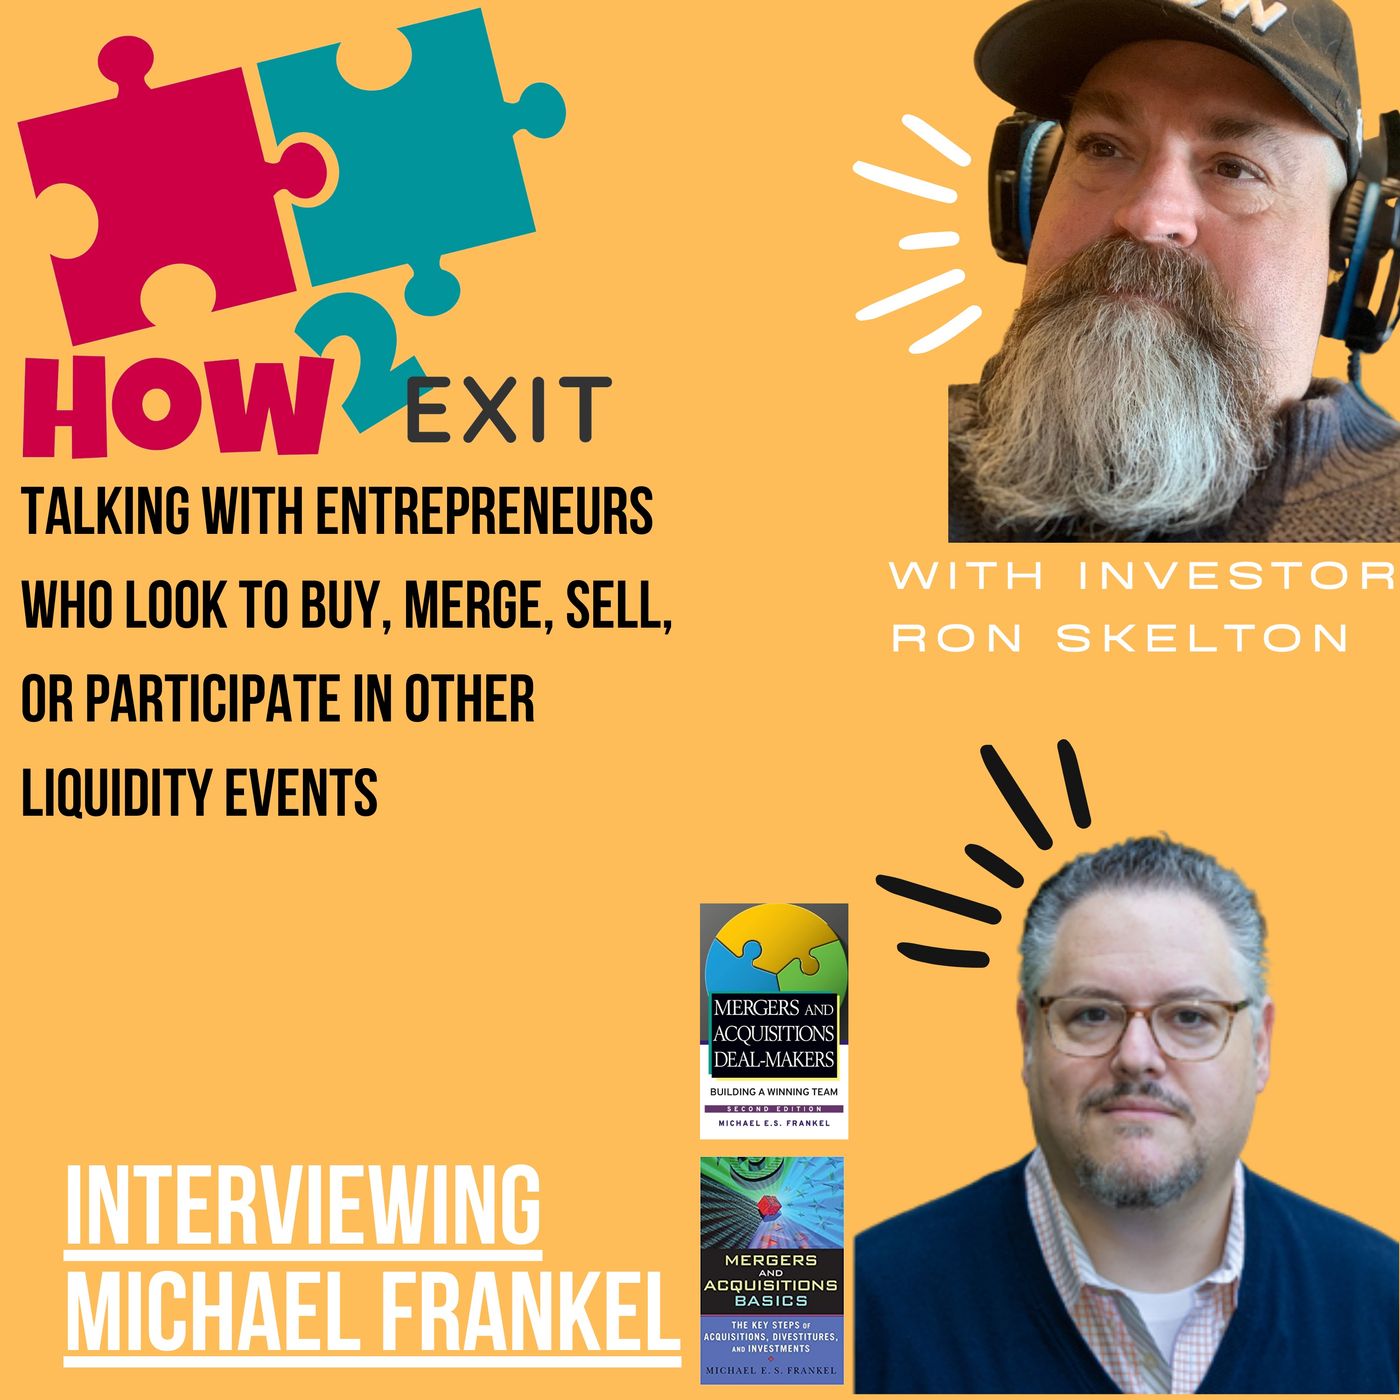 How2Exit Episode 72: Michael Frankel - Founder and Managing Partner of Trajectory Capital.